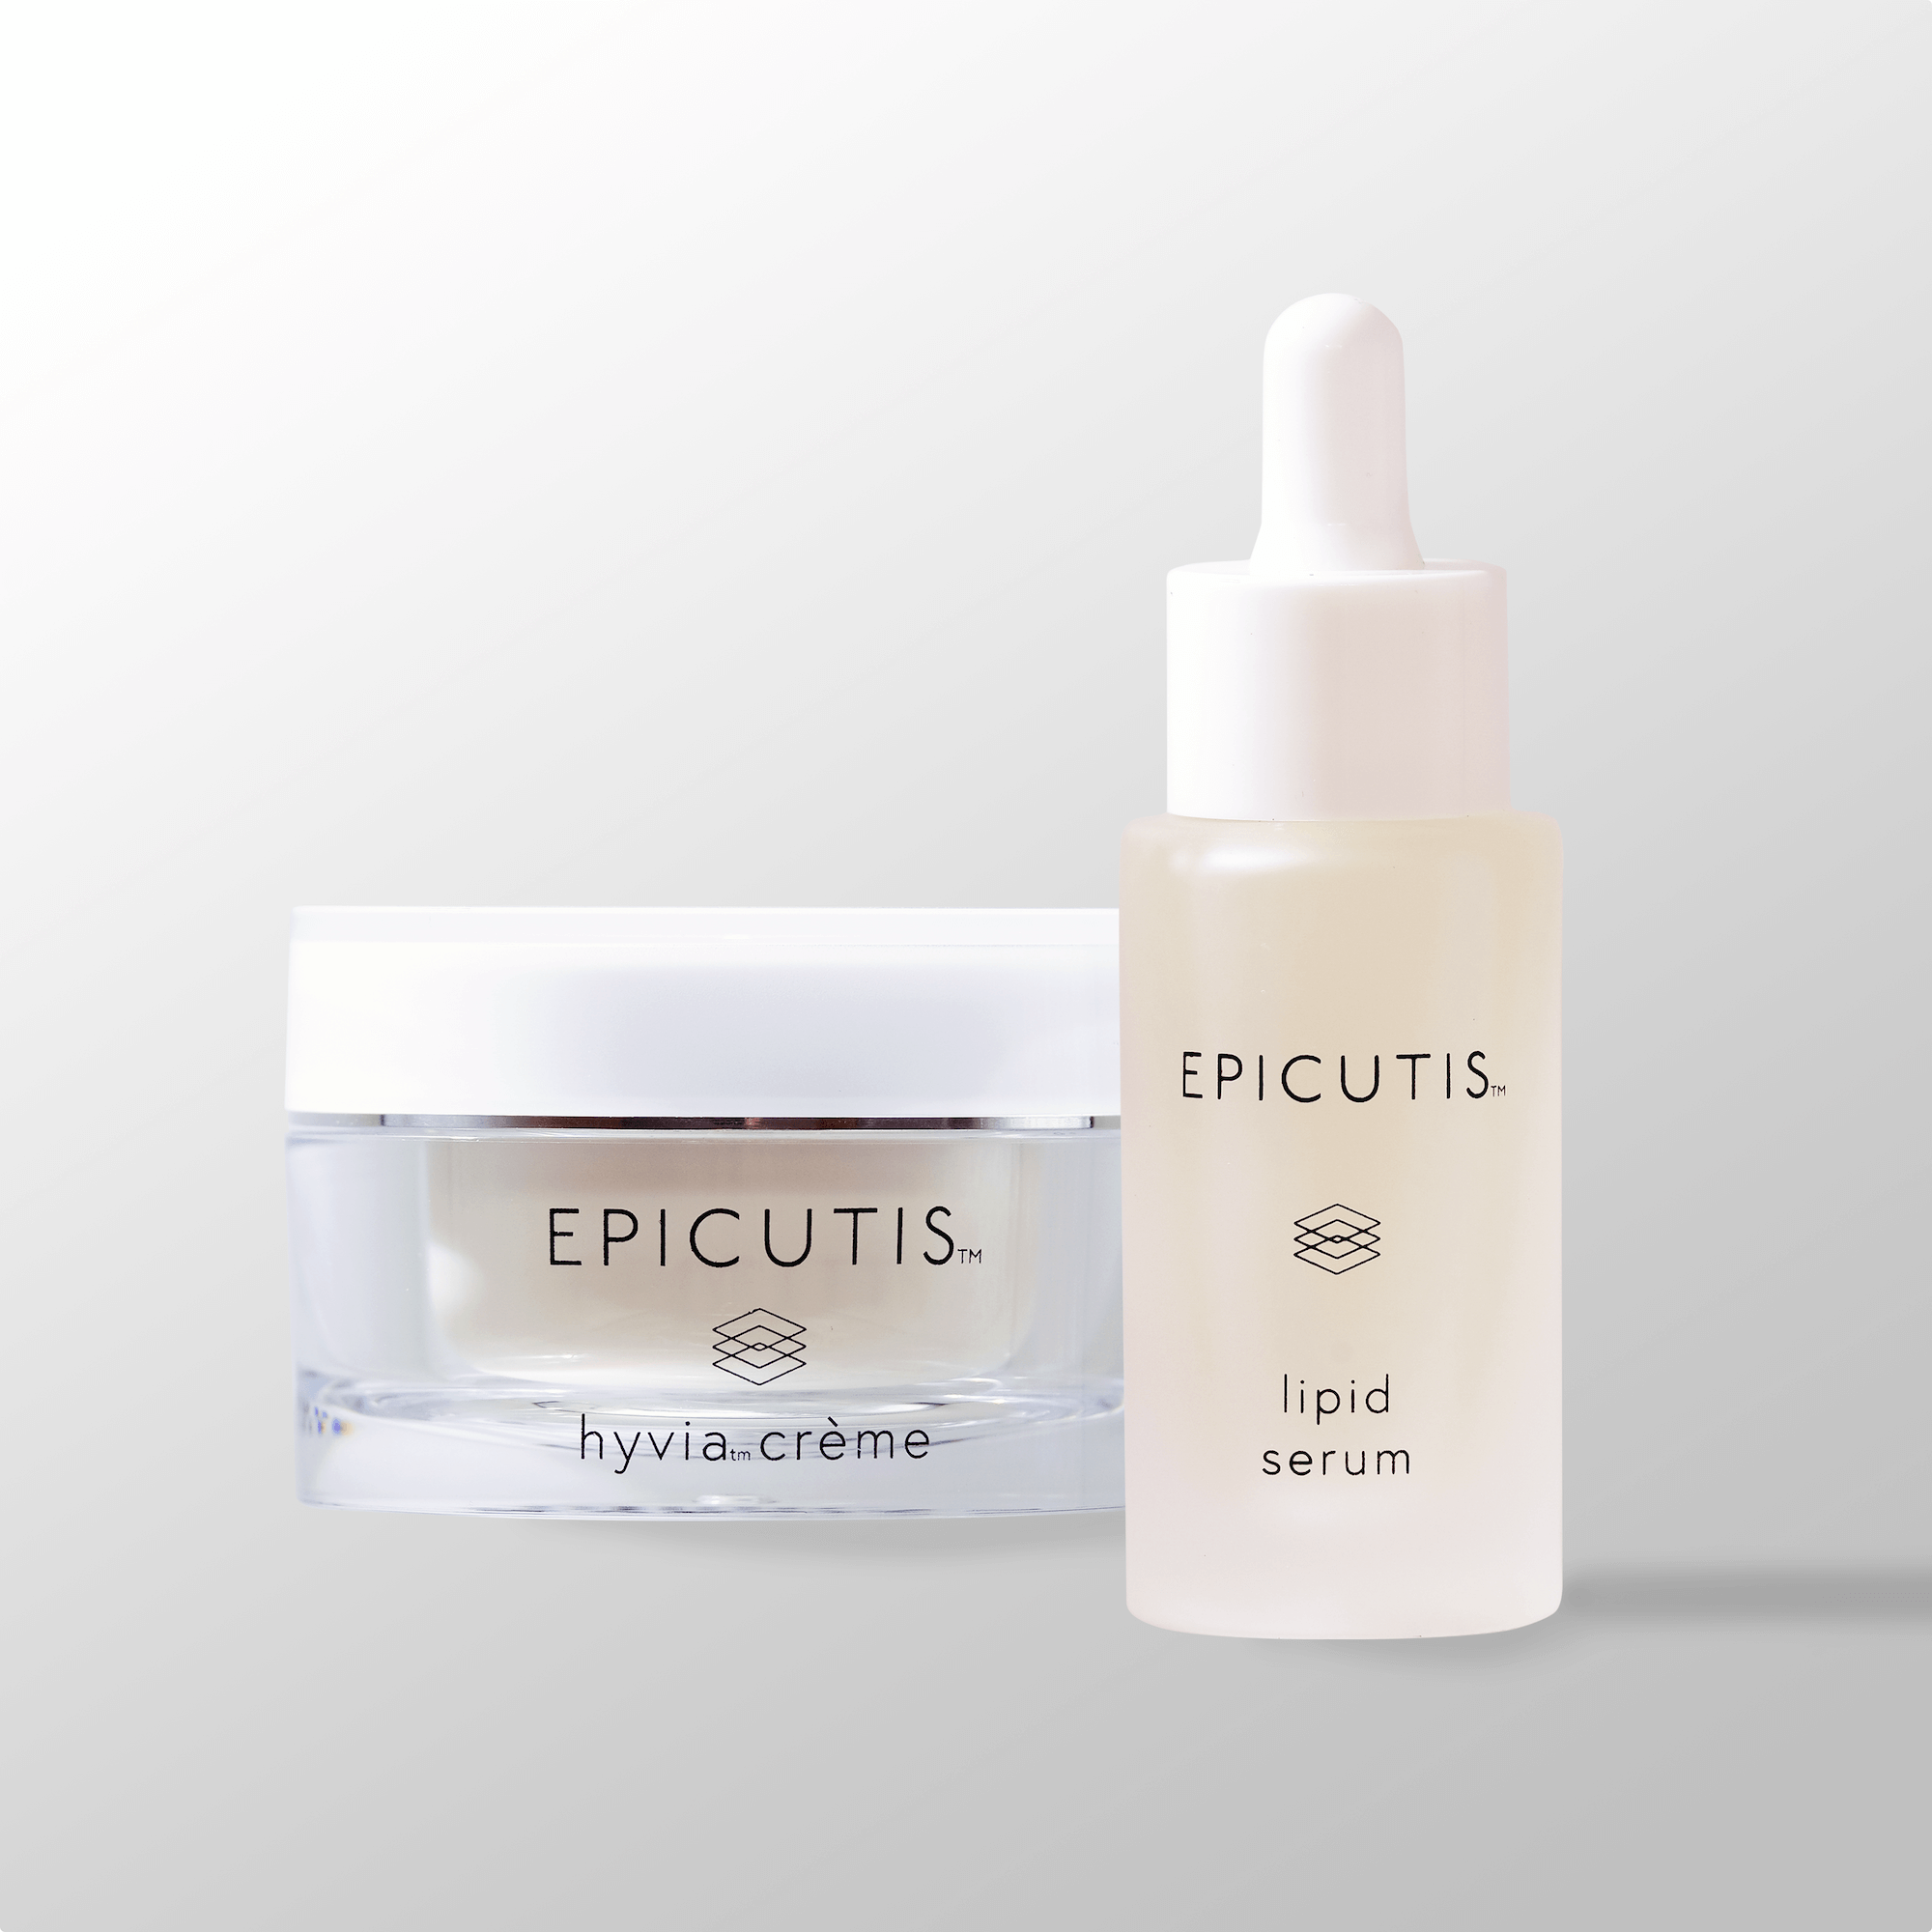 Epicutis Skincare Is Available at Timeless Aesthetics, LLC